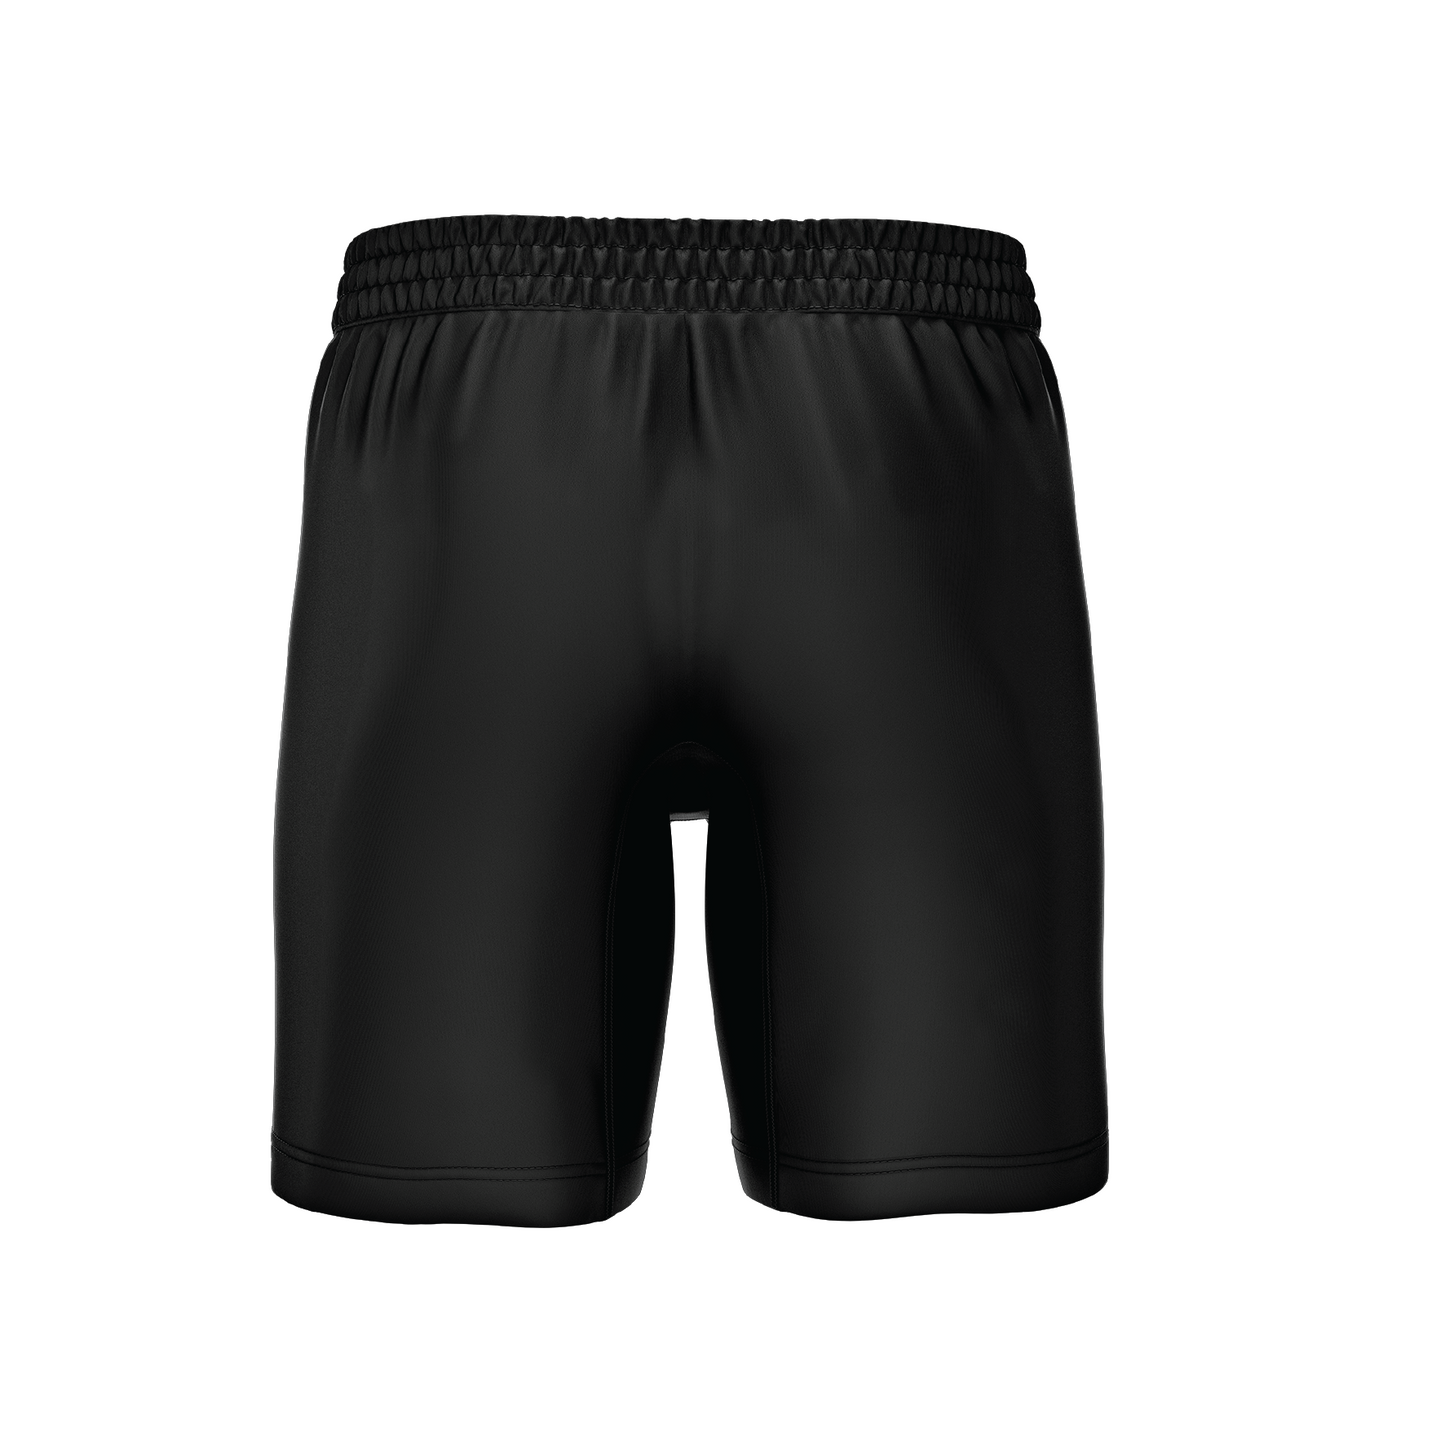 HFL UA AFL UMPIRE GAME DAY CASUAL SHORTS WITH POCKETS - MENS